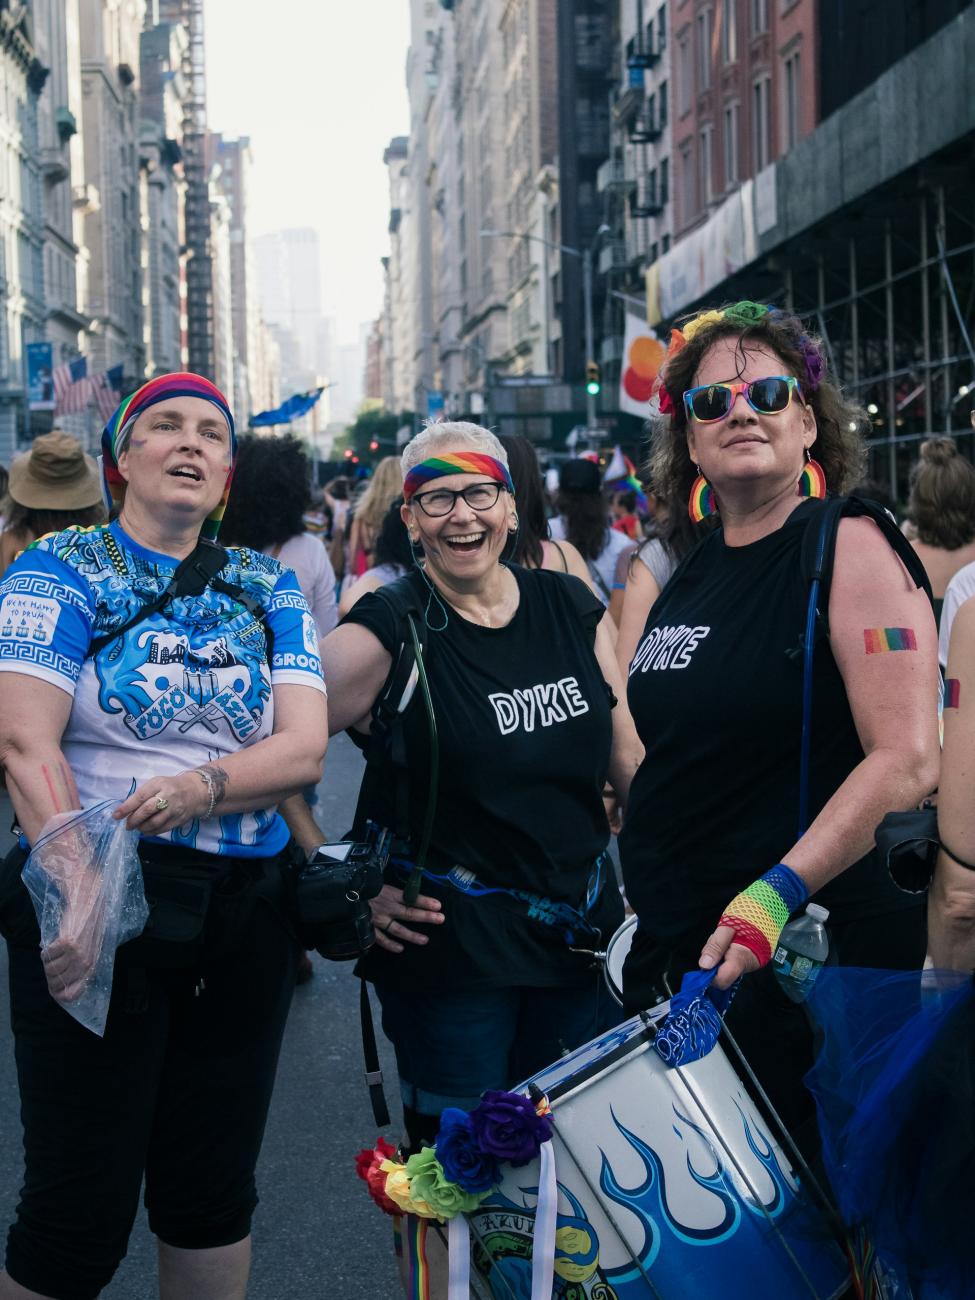 Three white people stand together at Pride, wearing various rainbow accessories like headbands and gloves. Two of them wear shirts that read "Dyke."